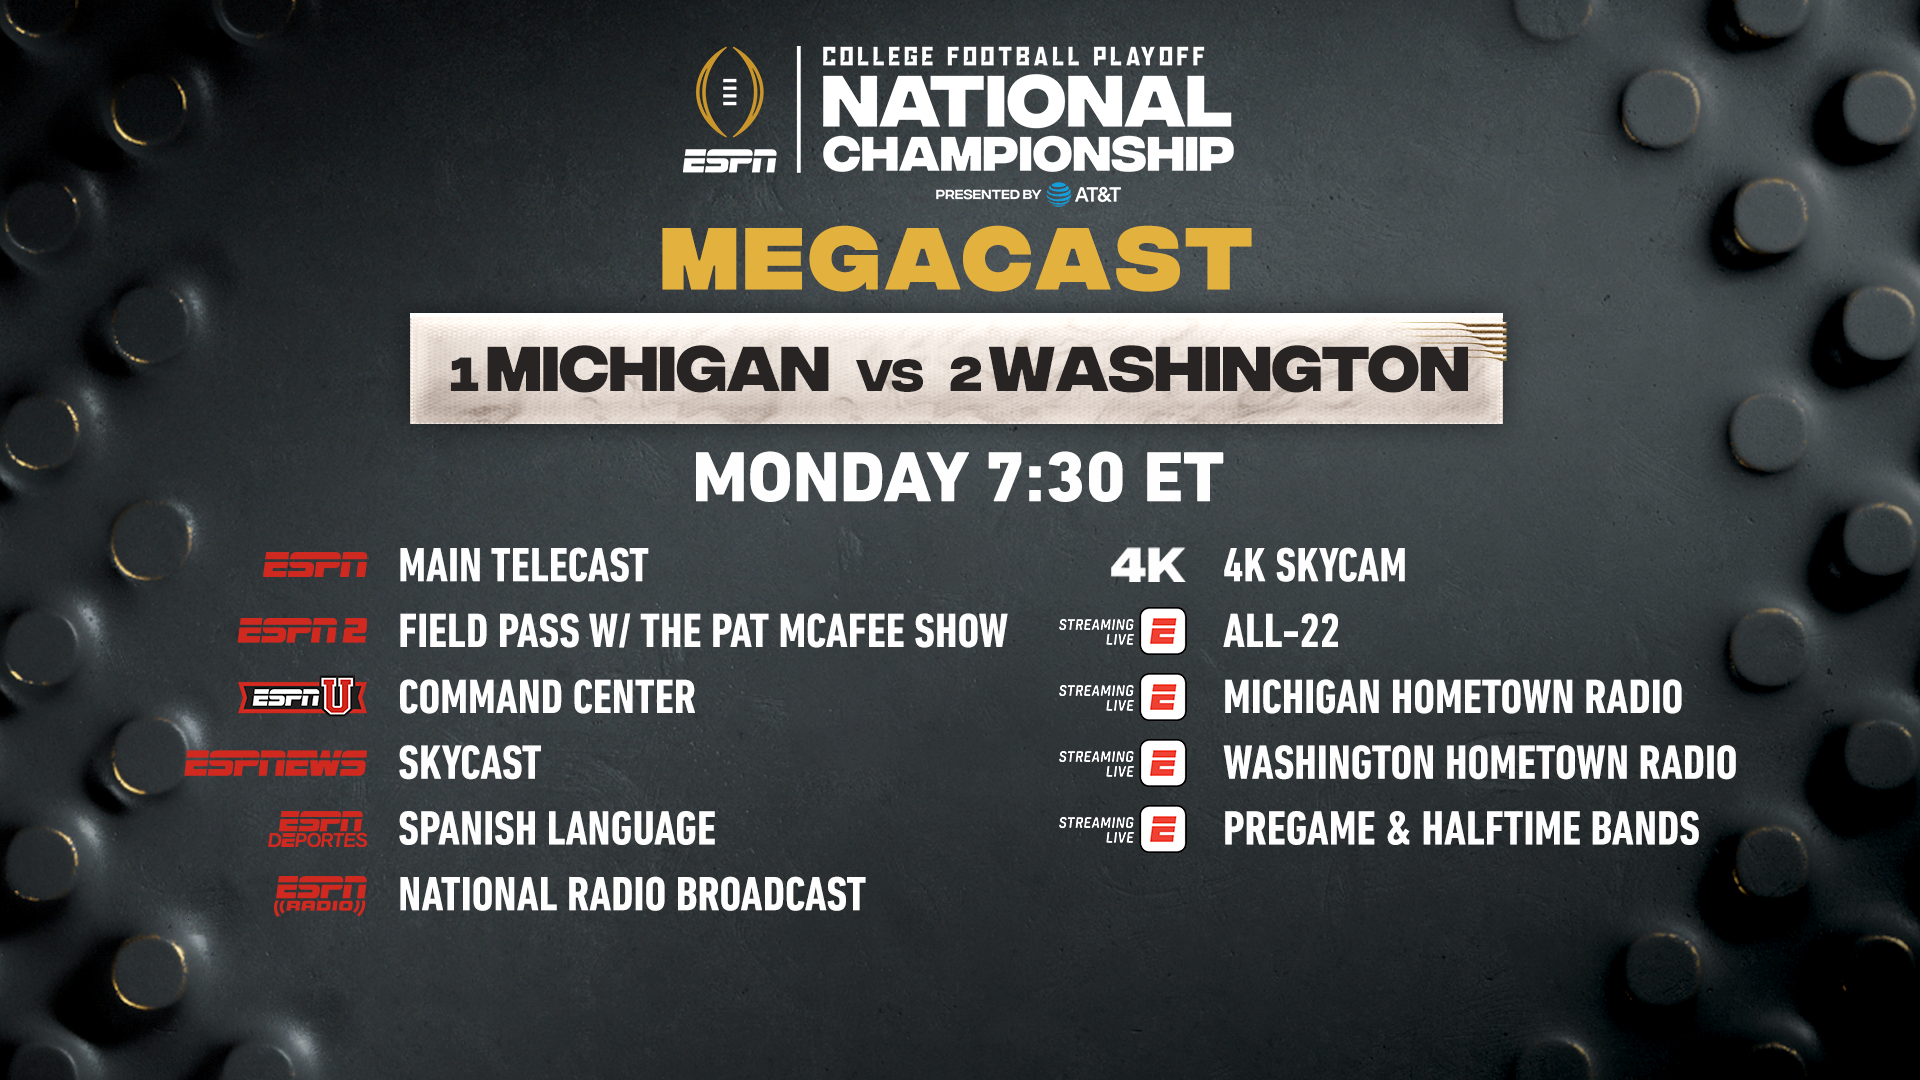 Signature MegaCast Presentation for 2024 College Football Playoff National Championship launched